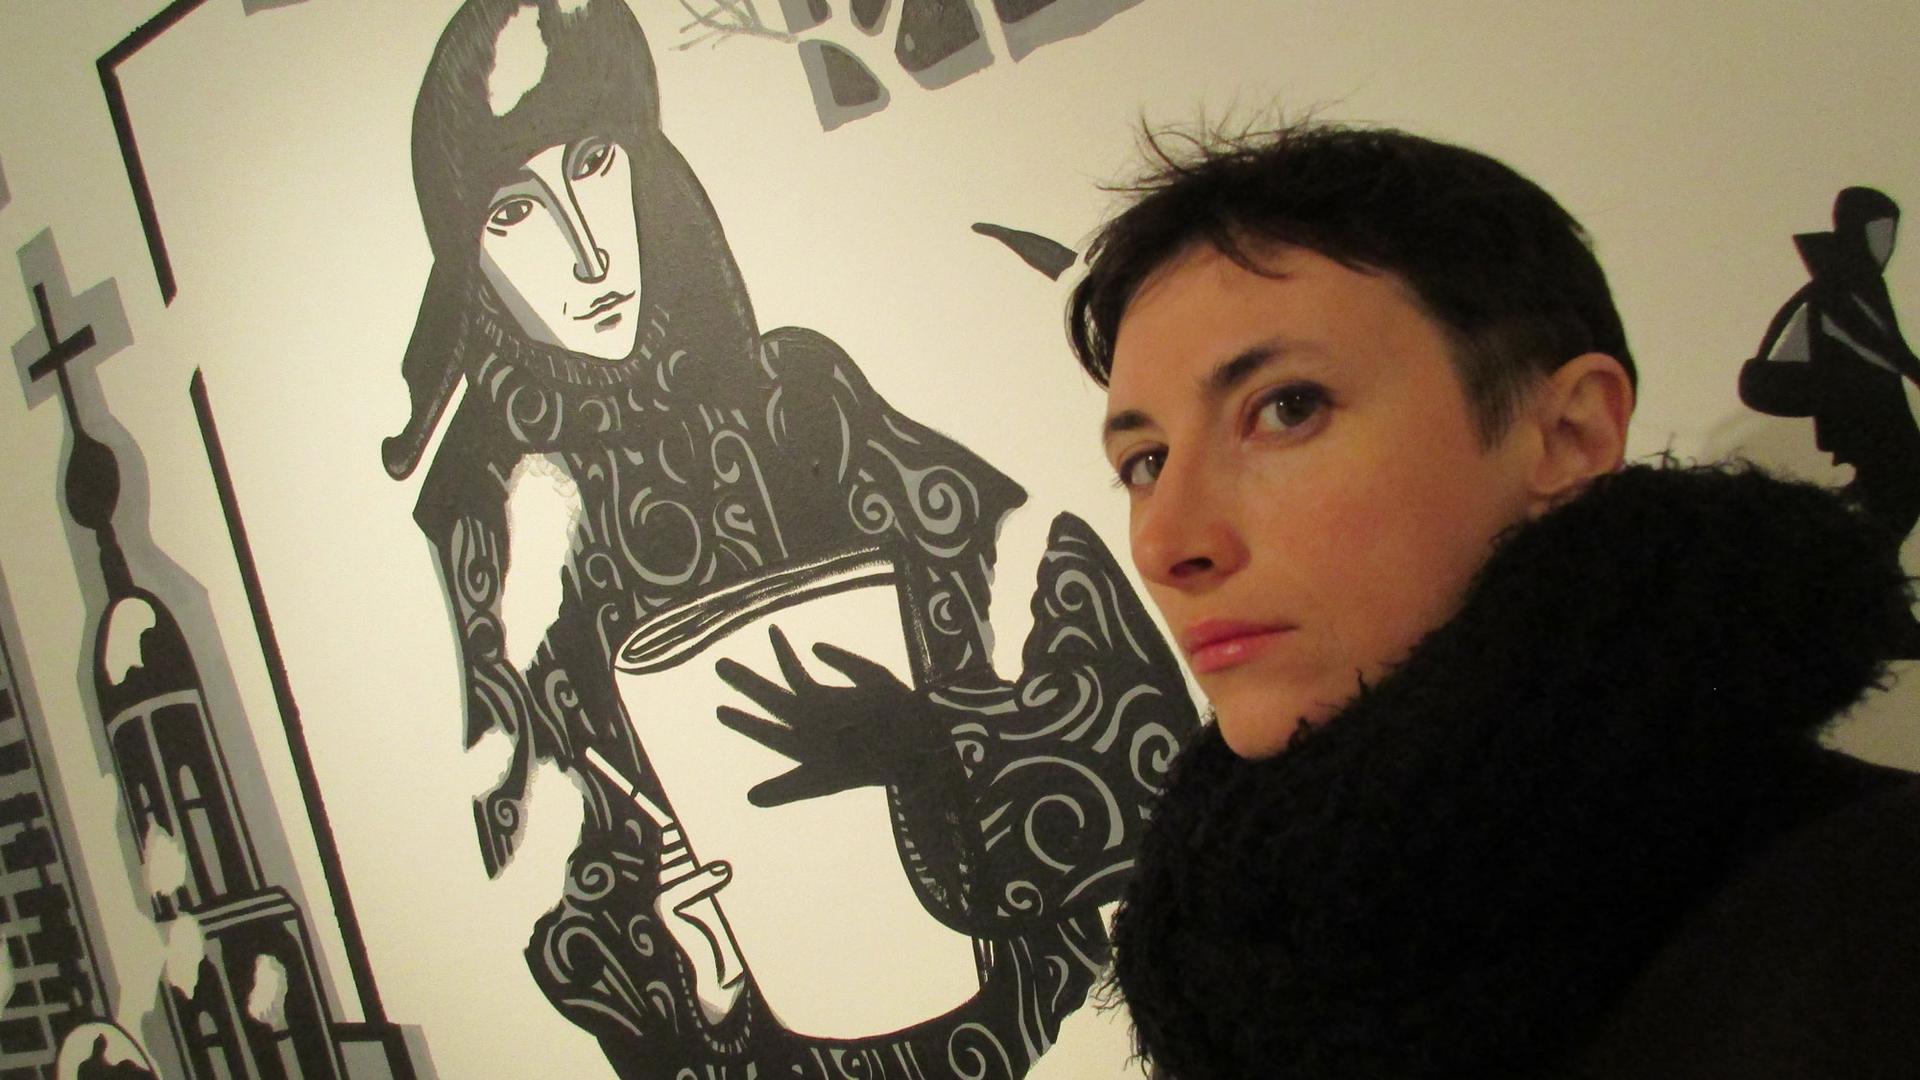 Victoria Lomasko is shown in this portrait photo with black coat standing in front of an illustrated wall.